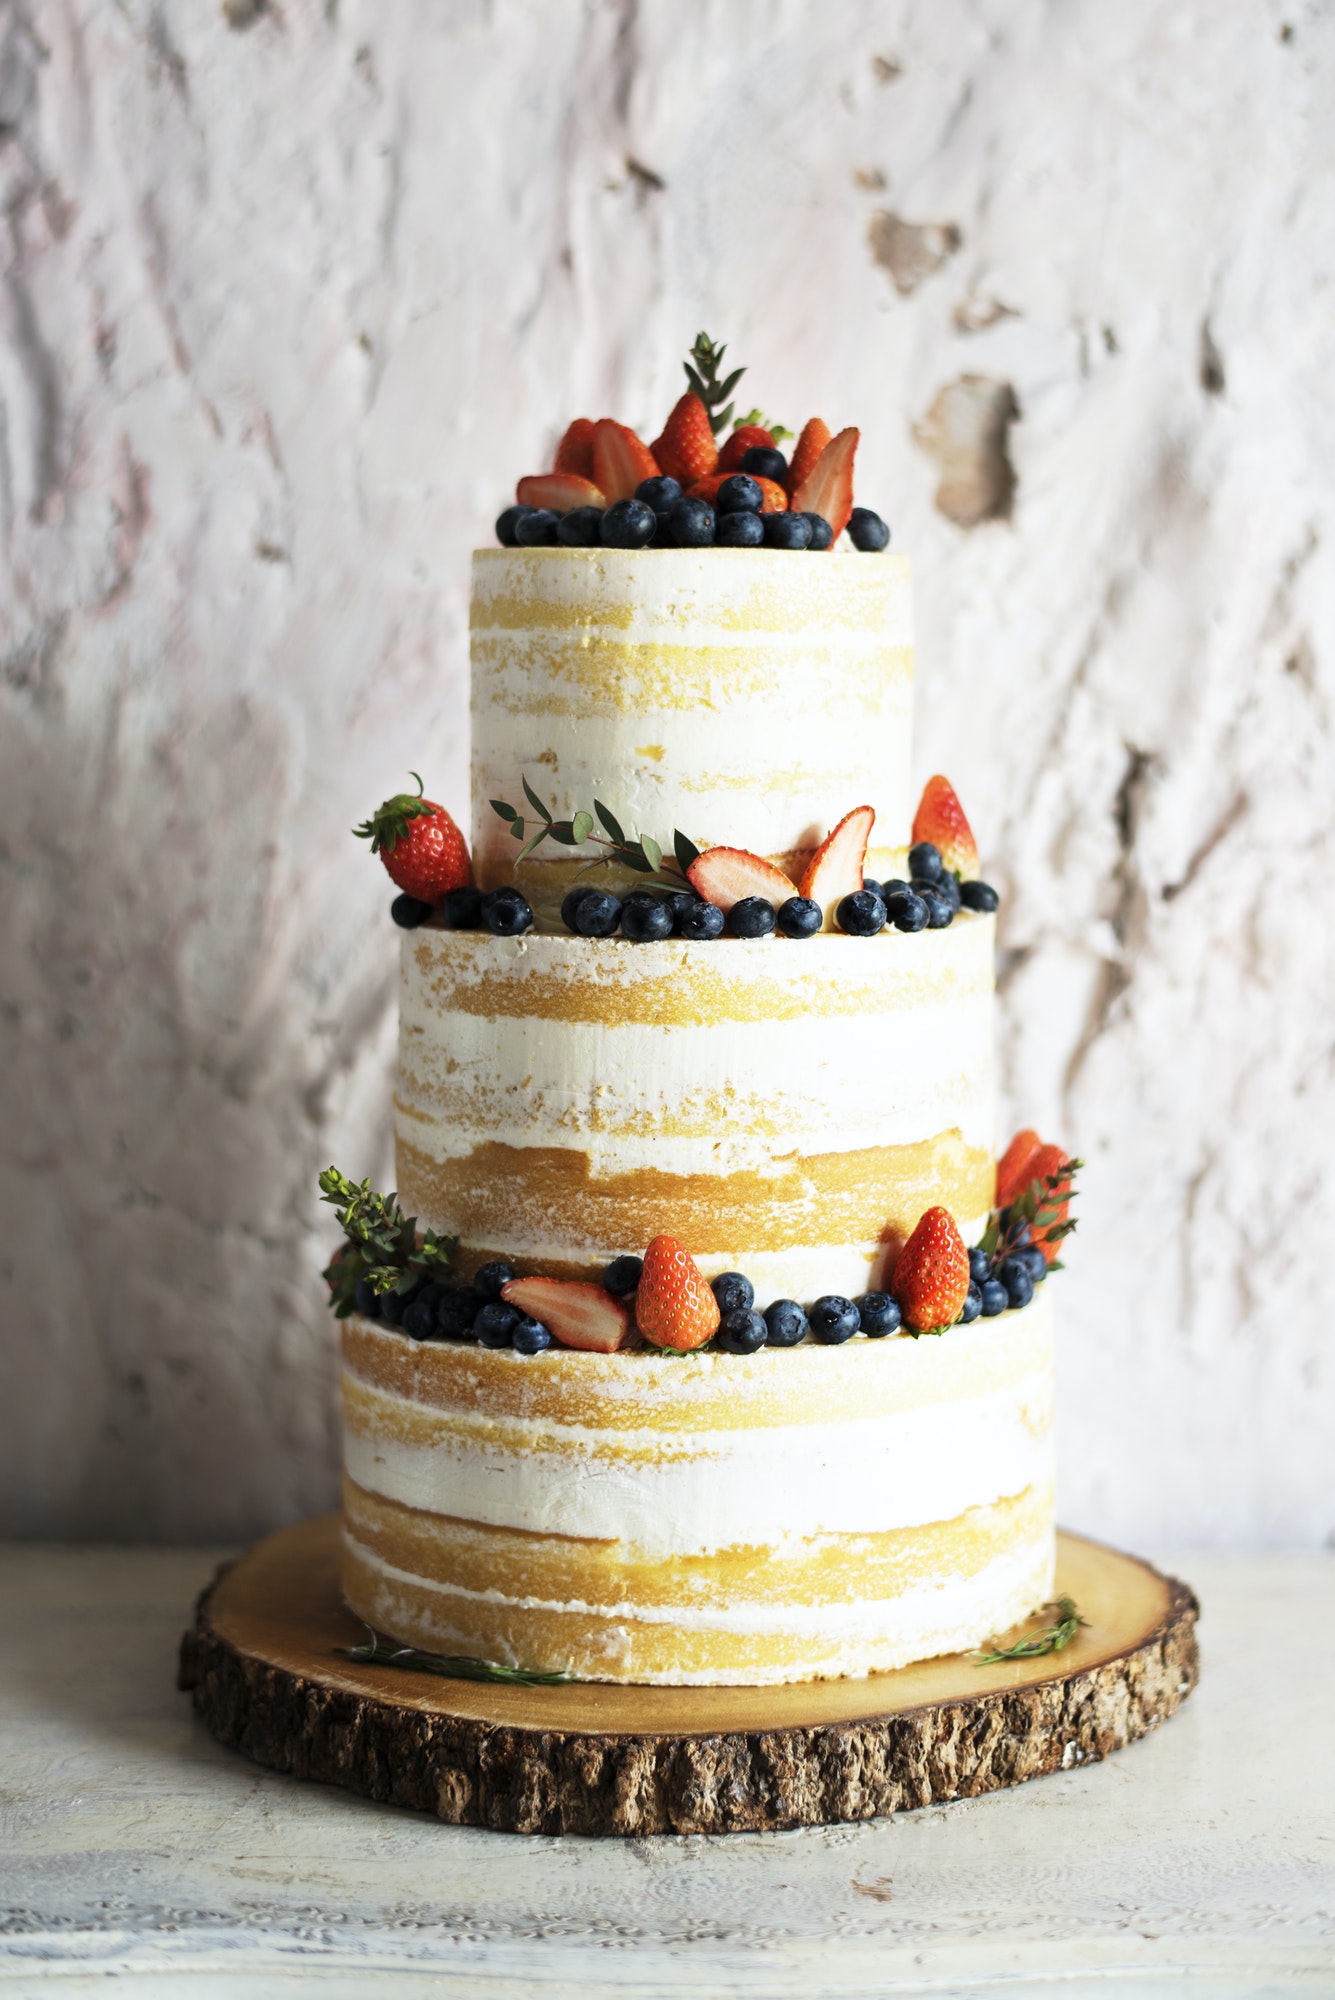 White Wedding Cake with Berries Decoration